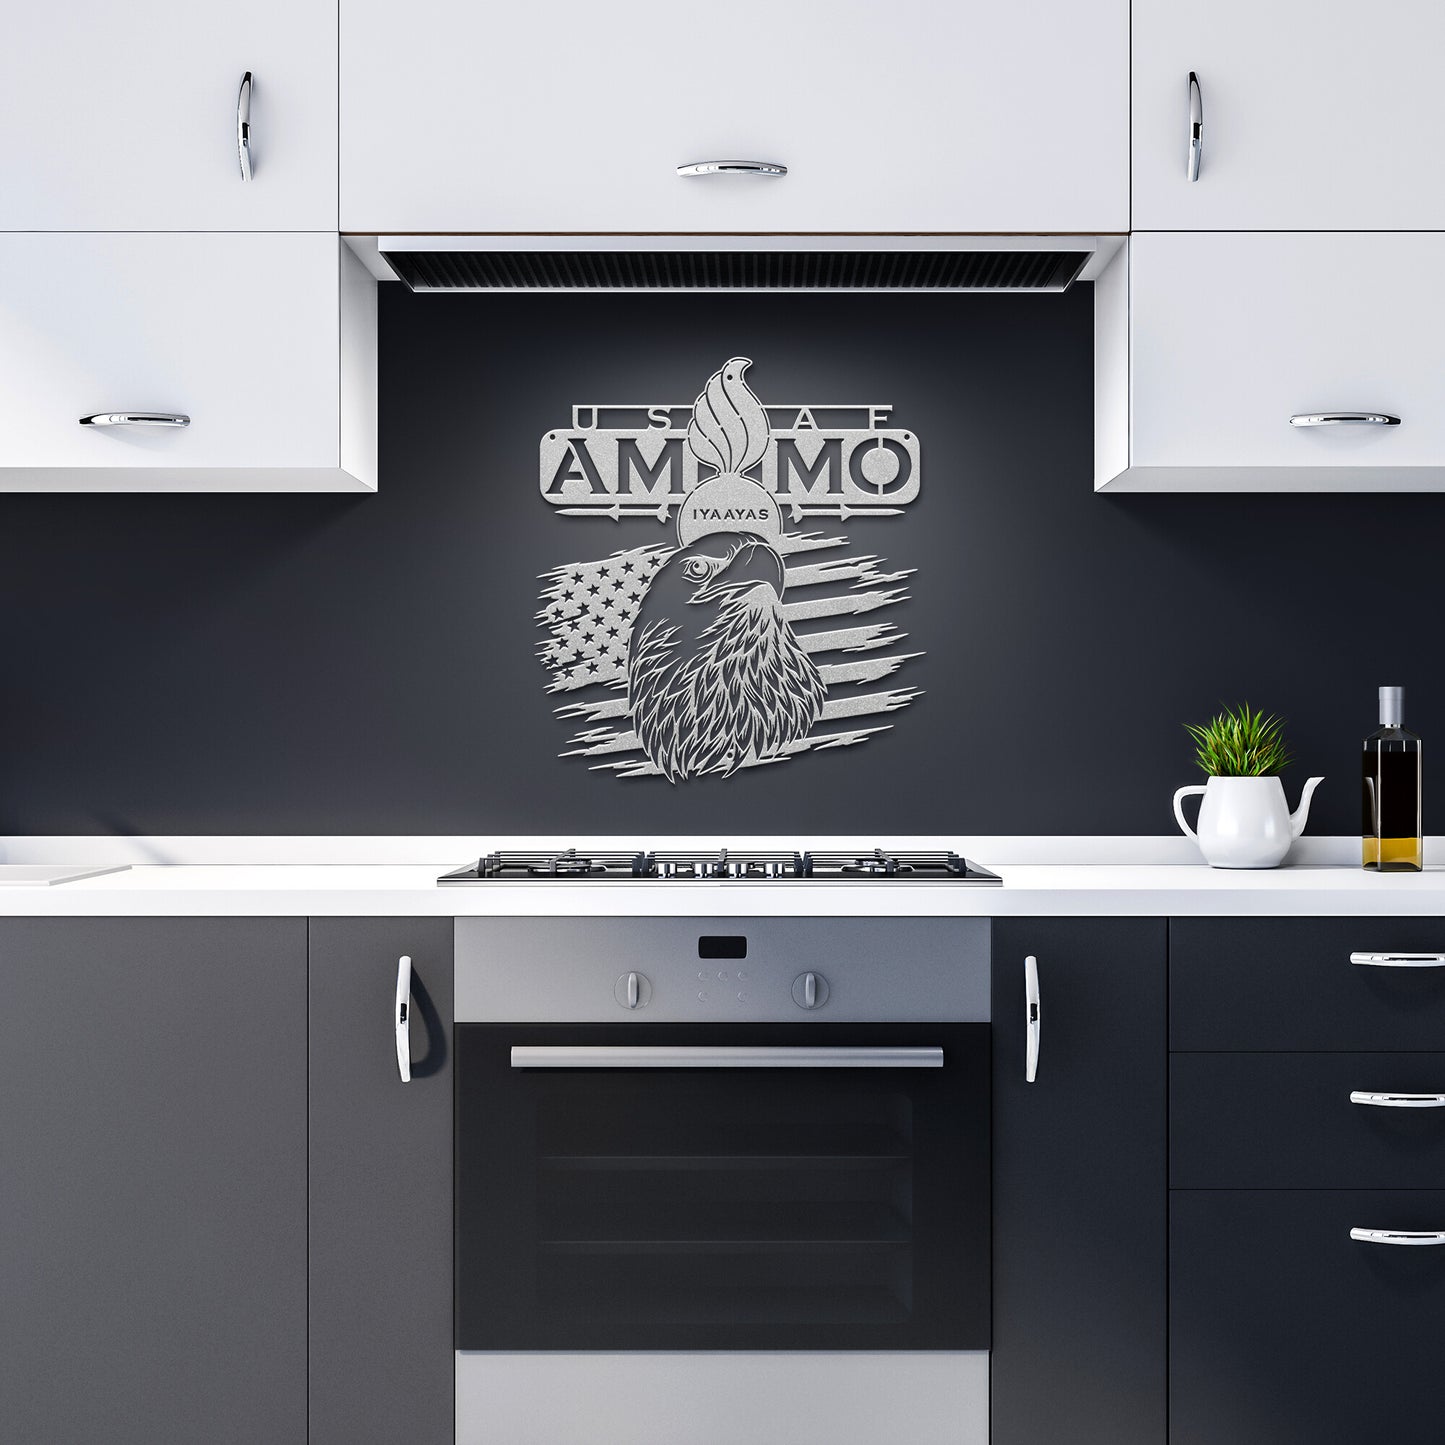 USAF AMMO Eagle Head American Flag Pisspot Missile Silhouettes With IYAAYAS Die Cut Hanging Metal Wall Sign